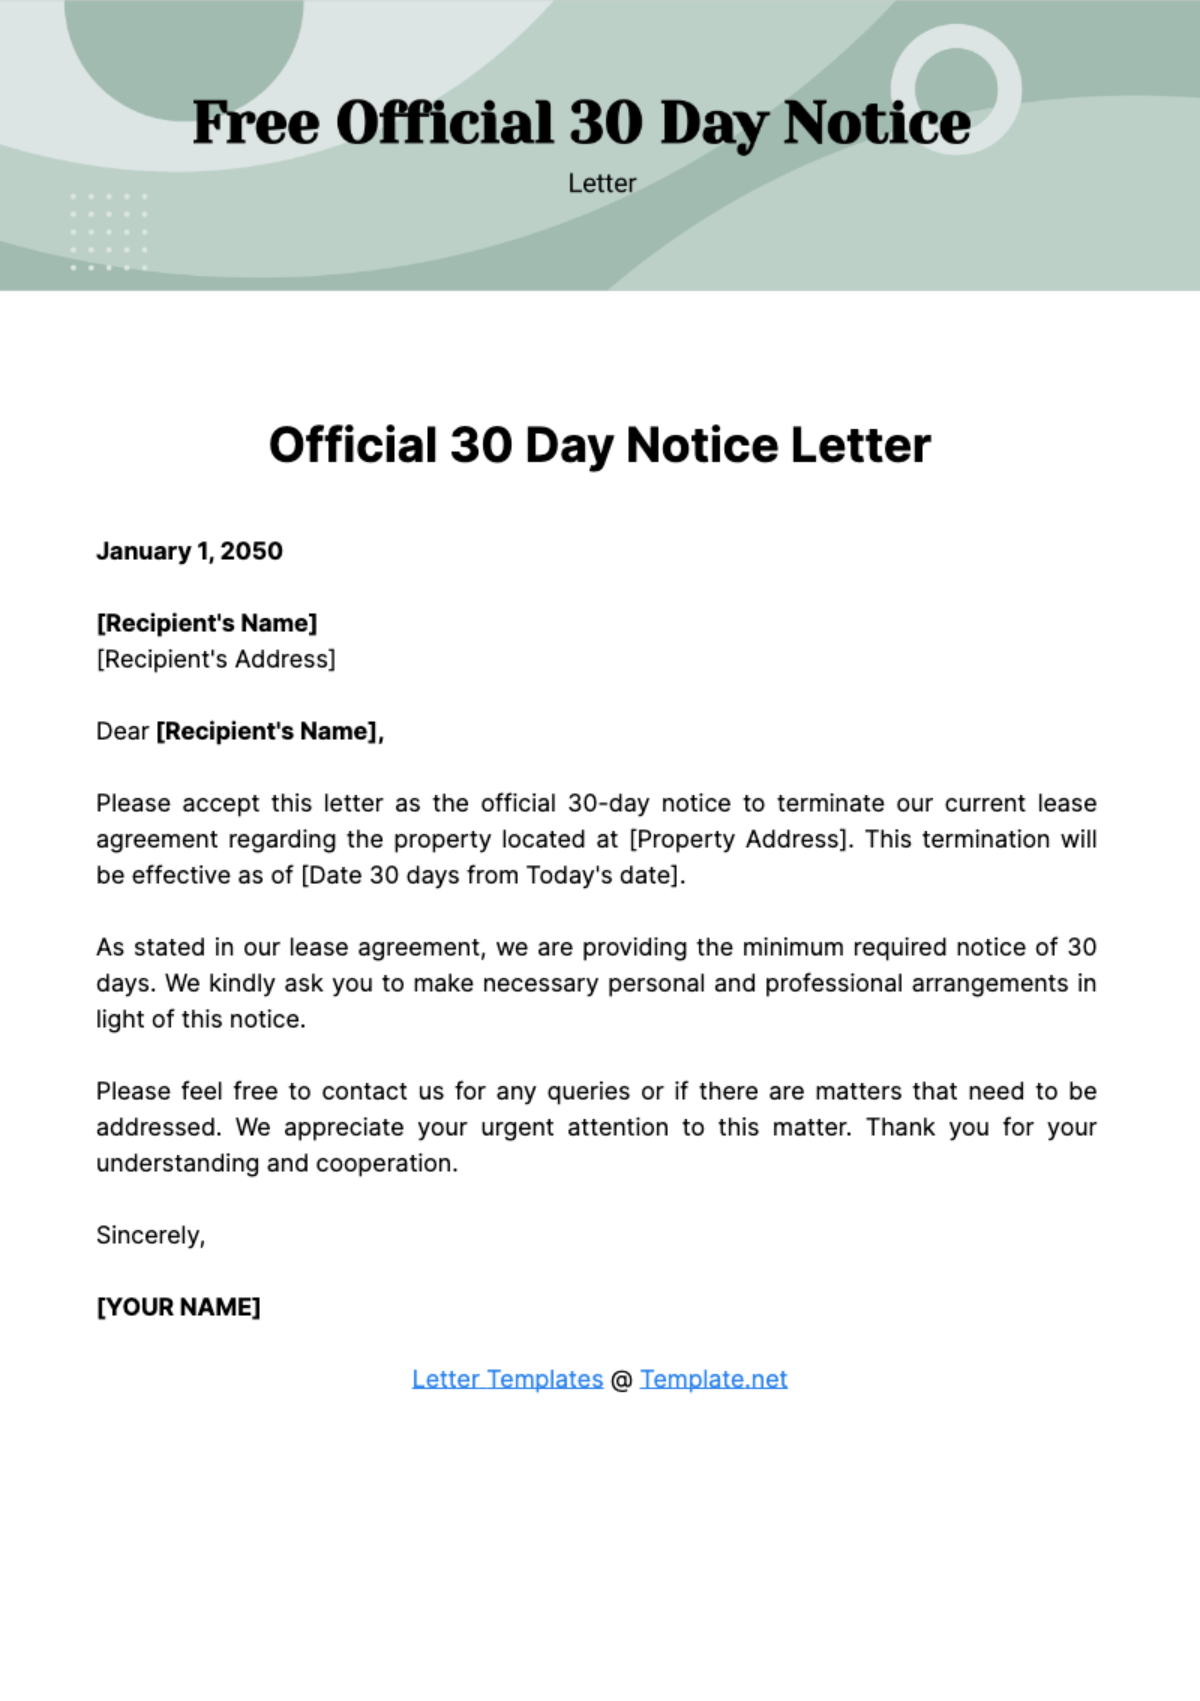 Free Official 30 Day Notice Letter Template